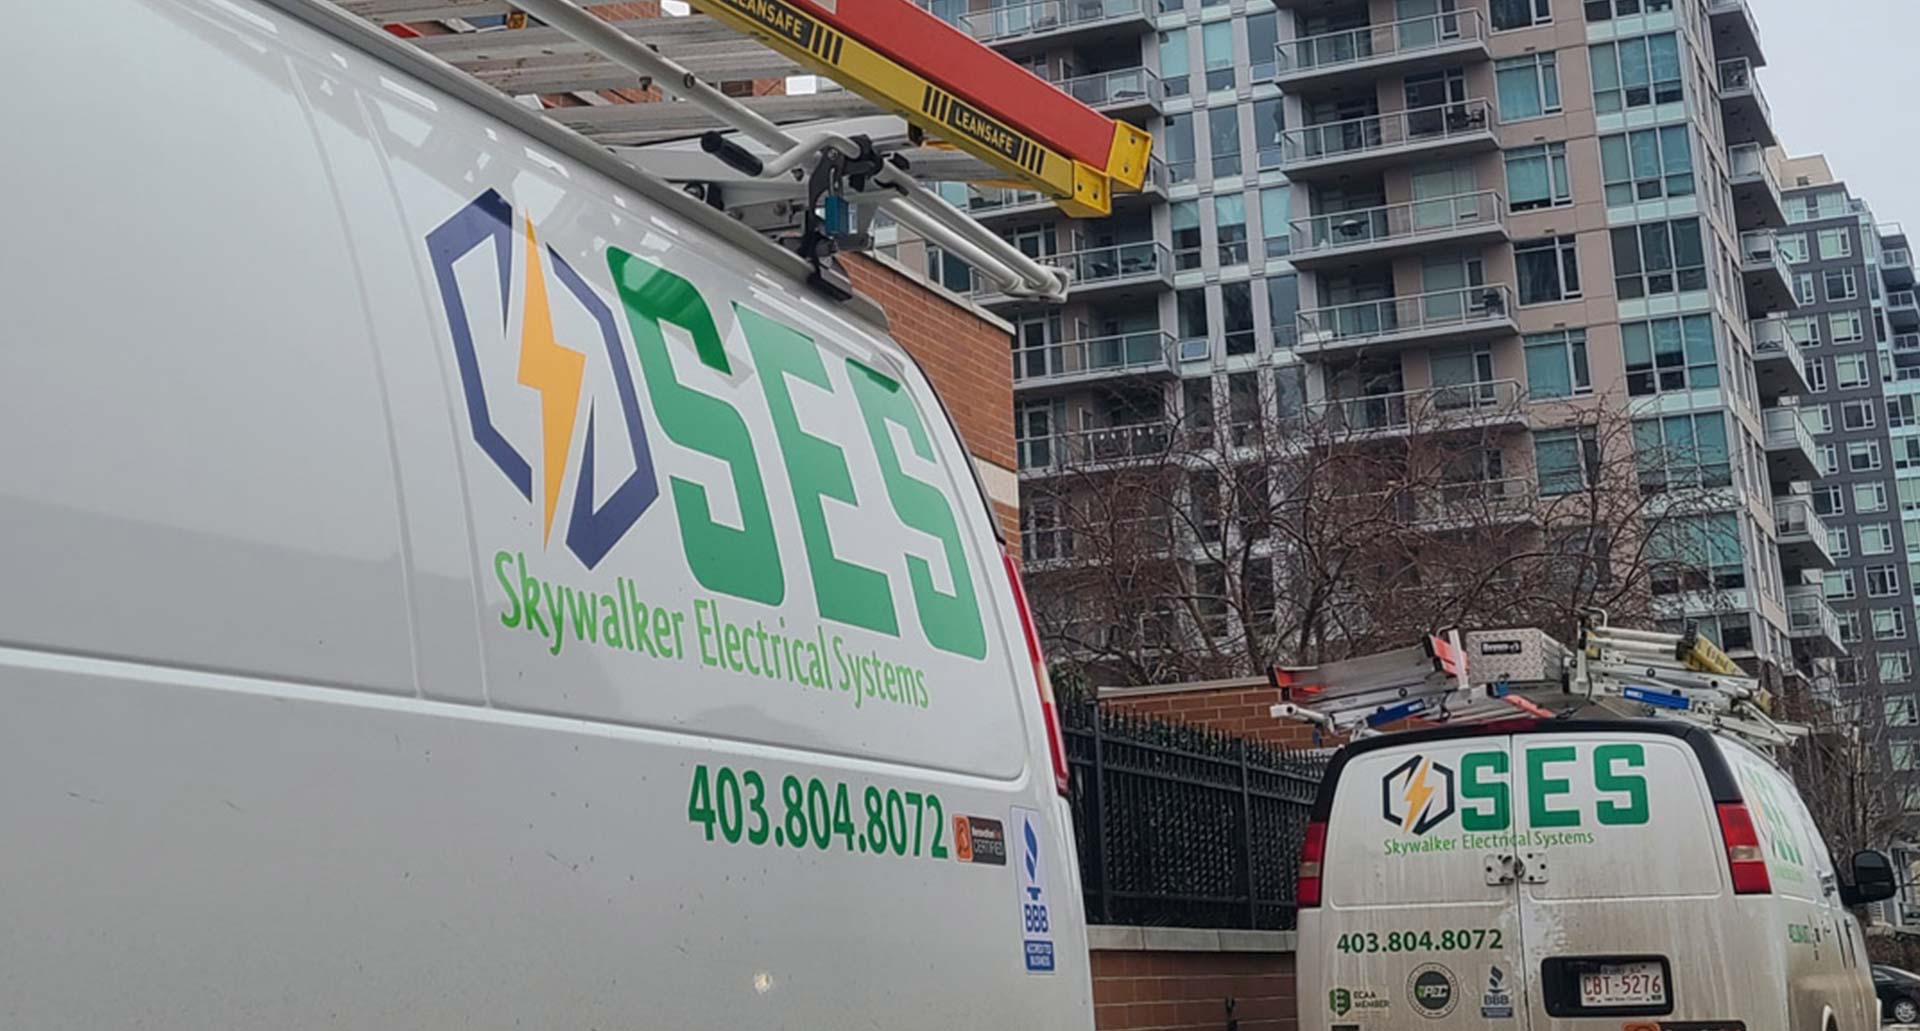 Skywalker Electrical Systems | Residential & Commercial Electrician | Calgary and Surrounding Areas